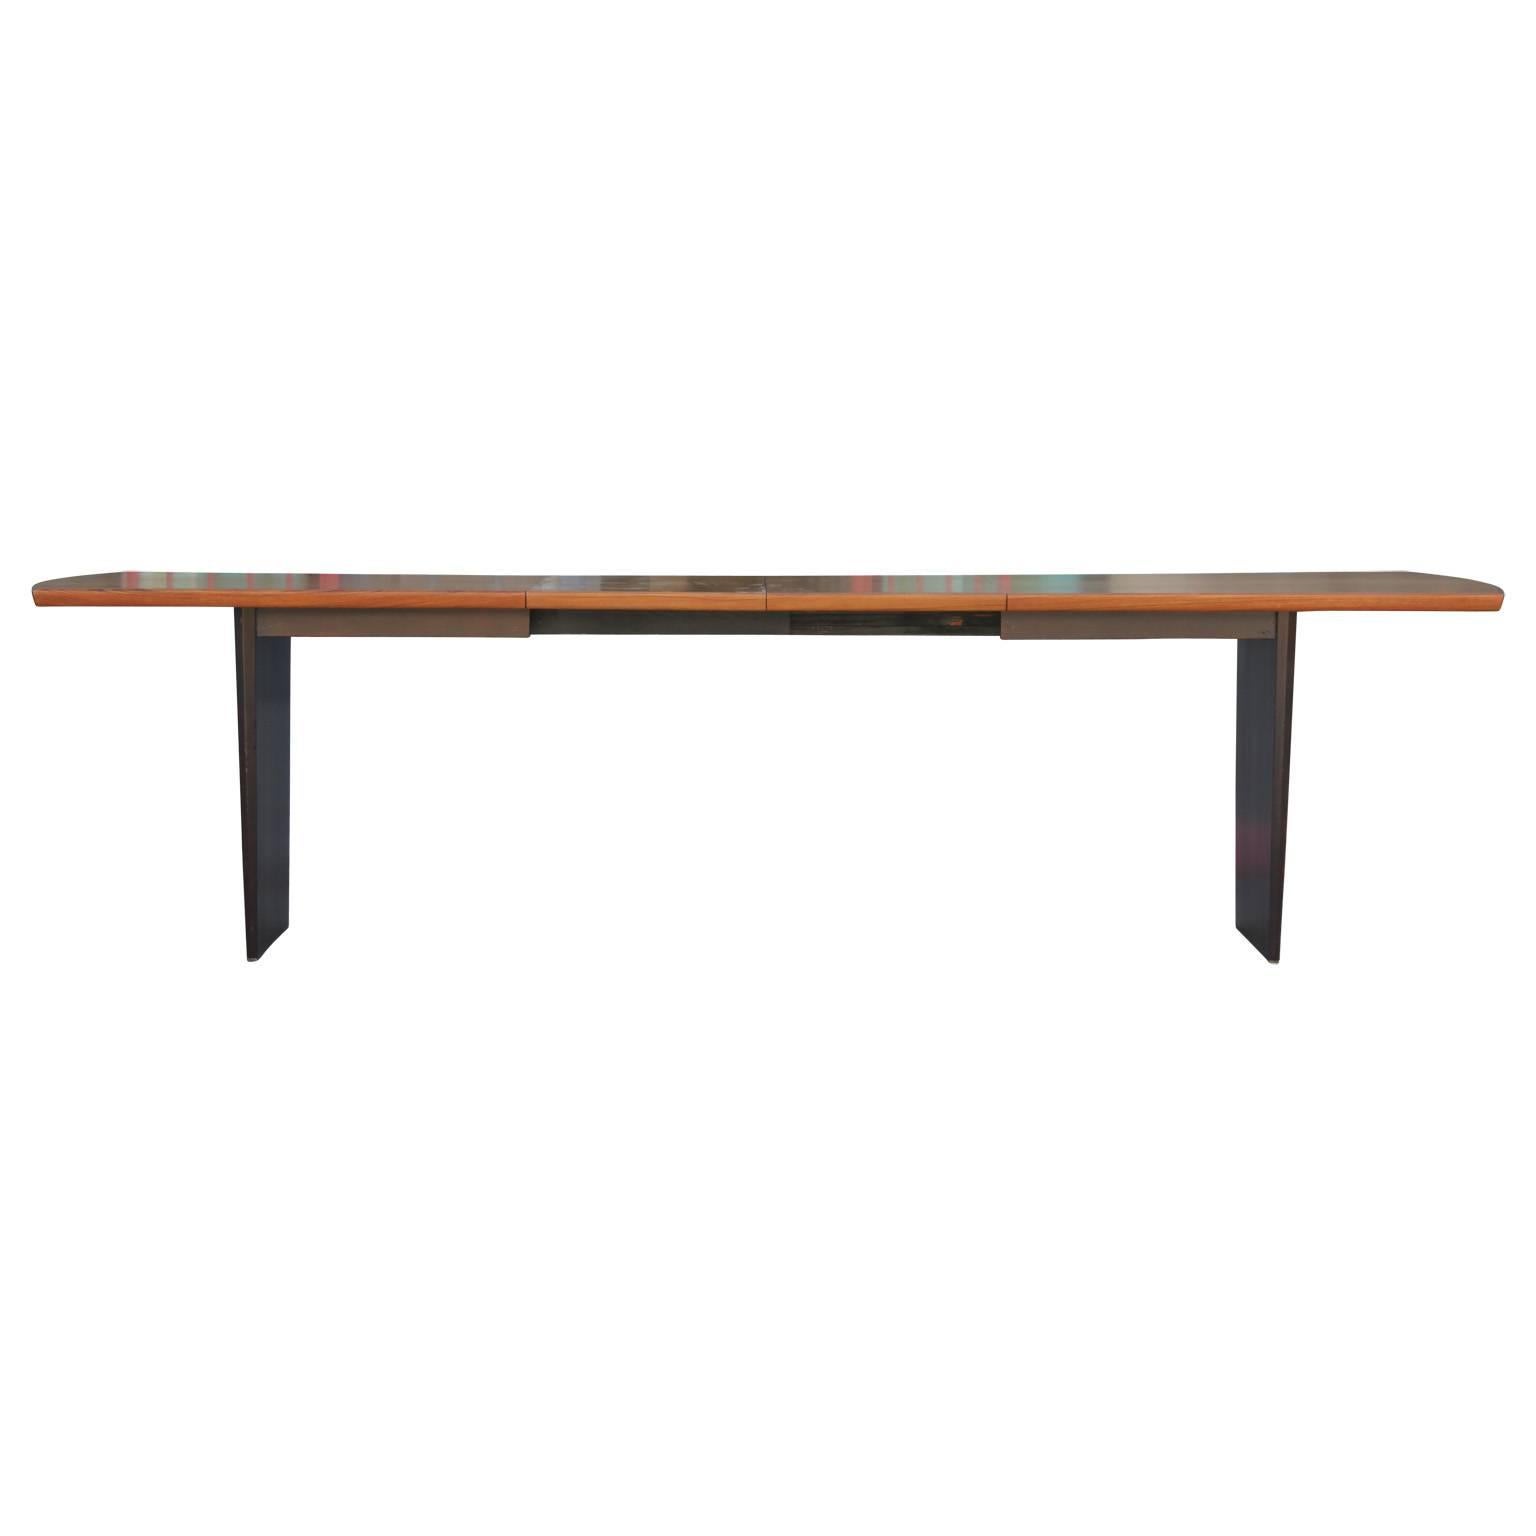 Mid-20th Century Modern Harvey Probber Rosewood and Teak Two-Leaf Bow Tie Dining Table